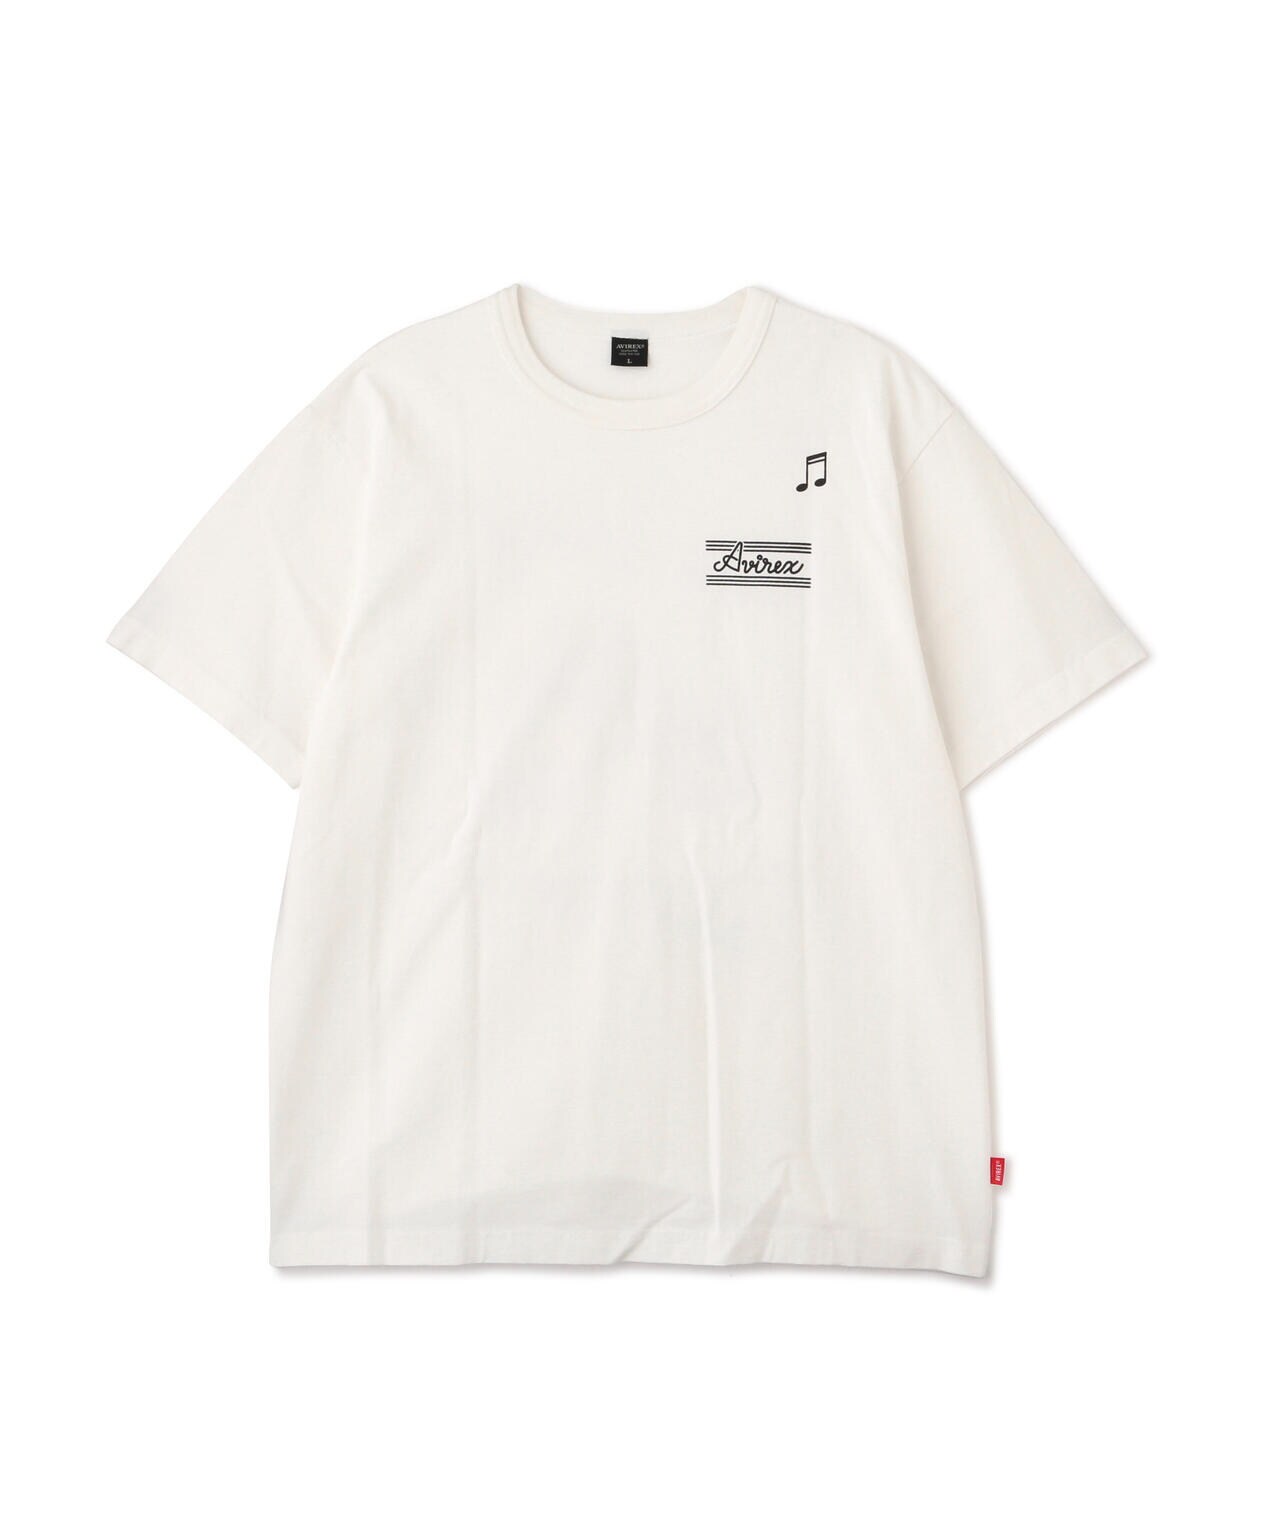 WEST COAST T-SHIRT PIN UP &COCKTAIL/Tシャツ | AVIREX